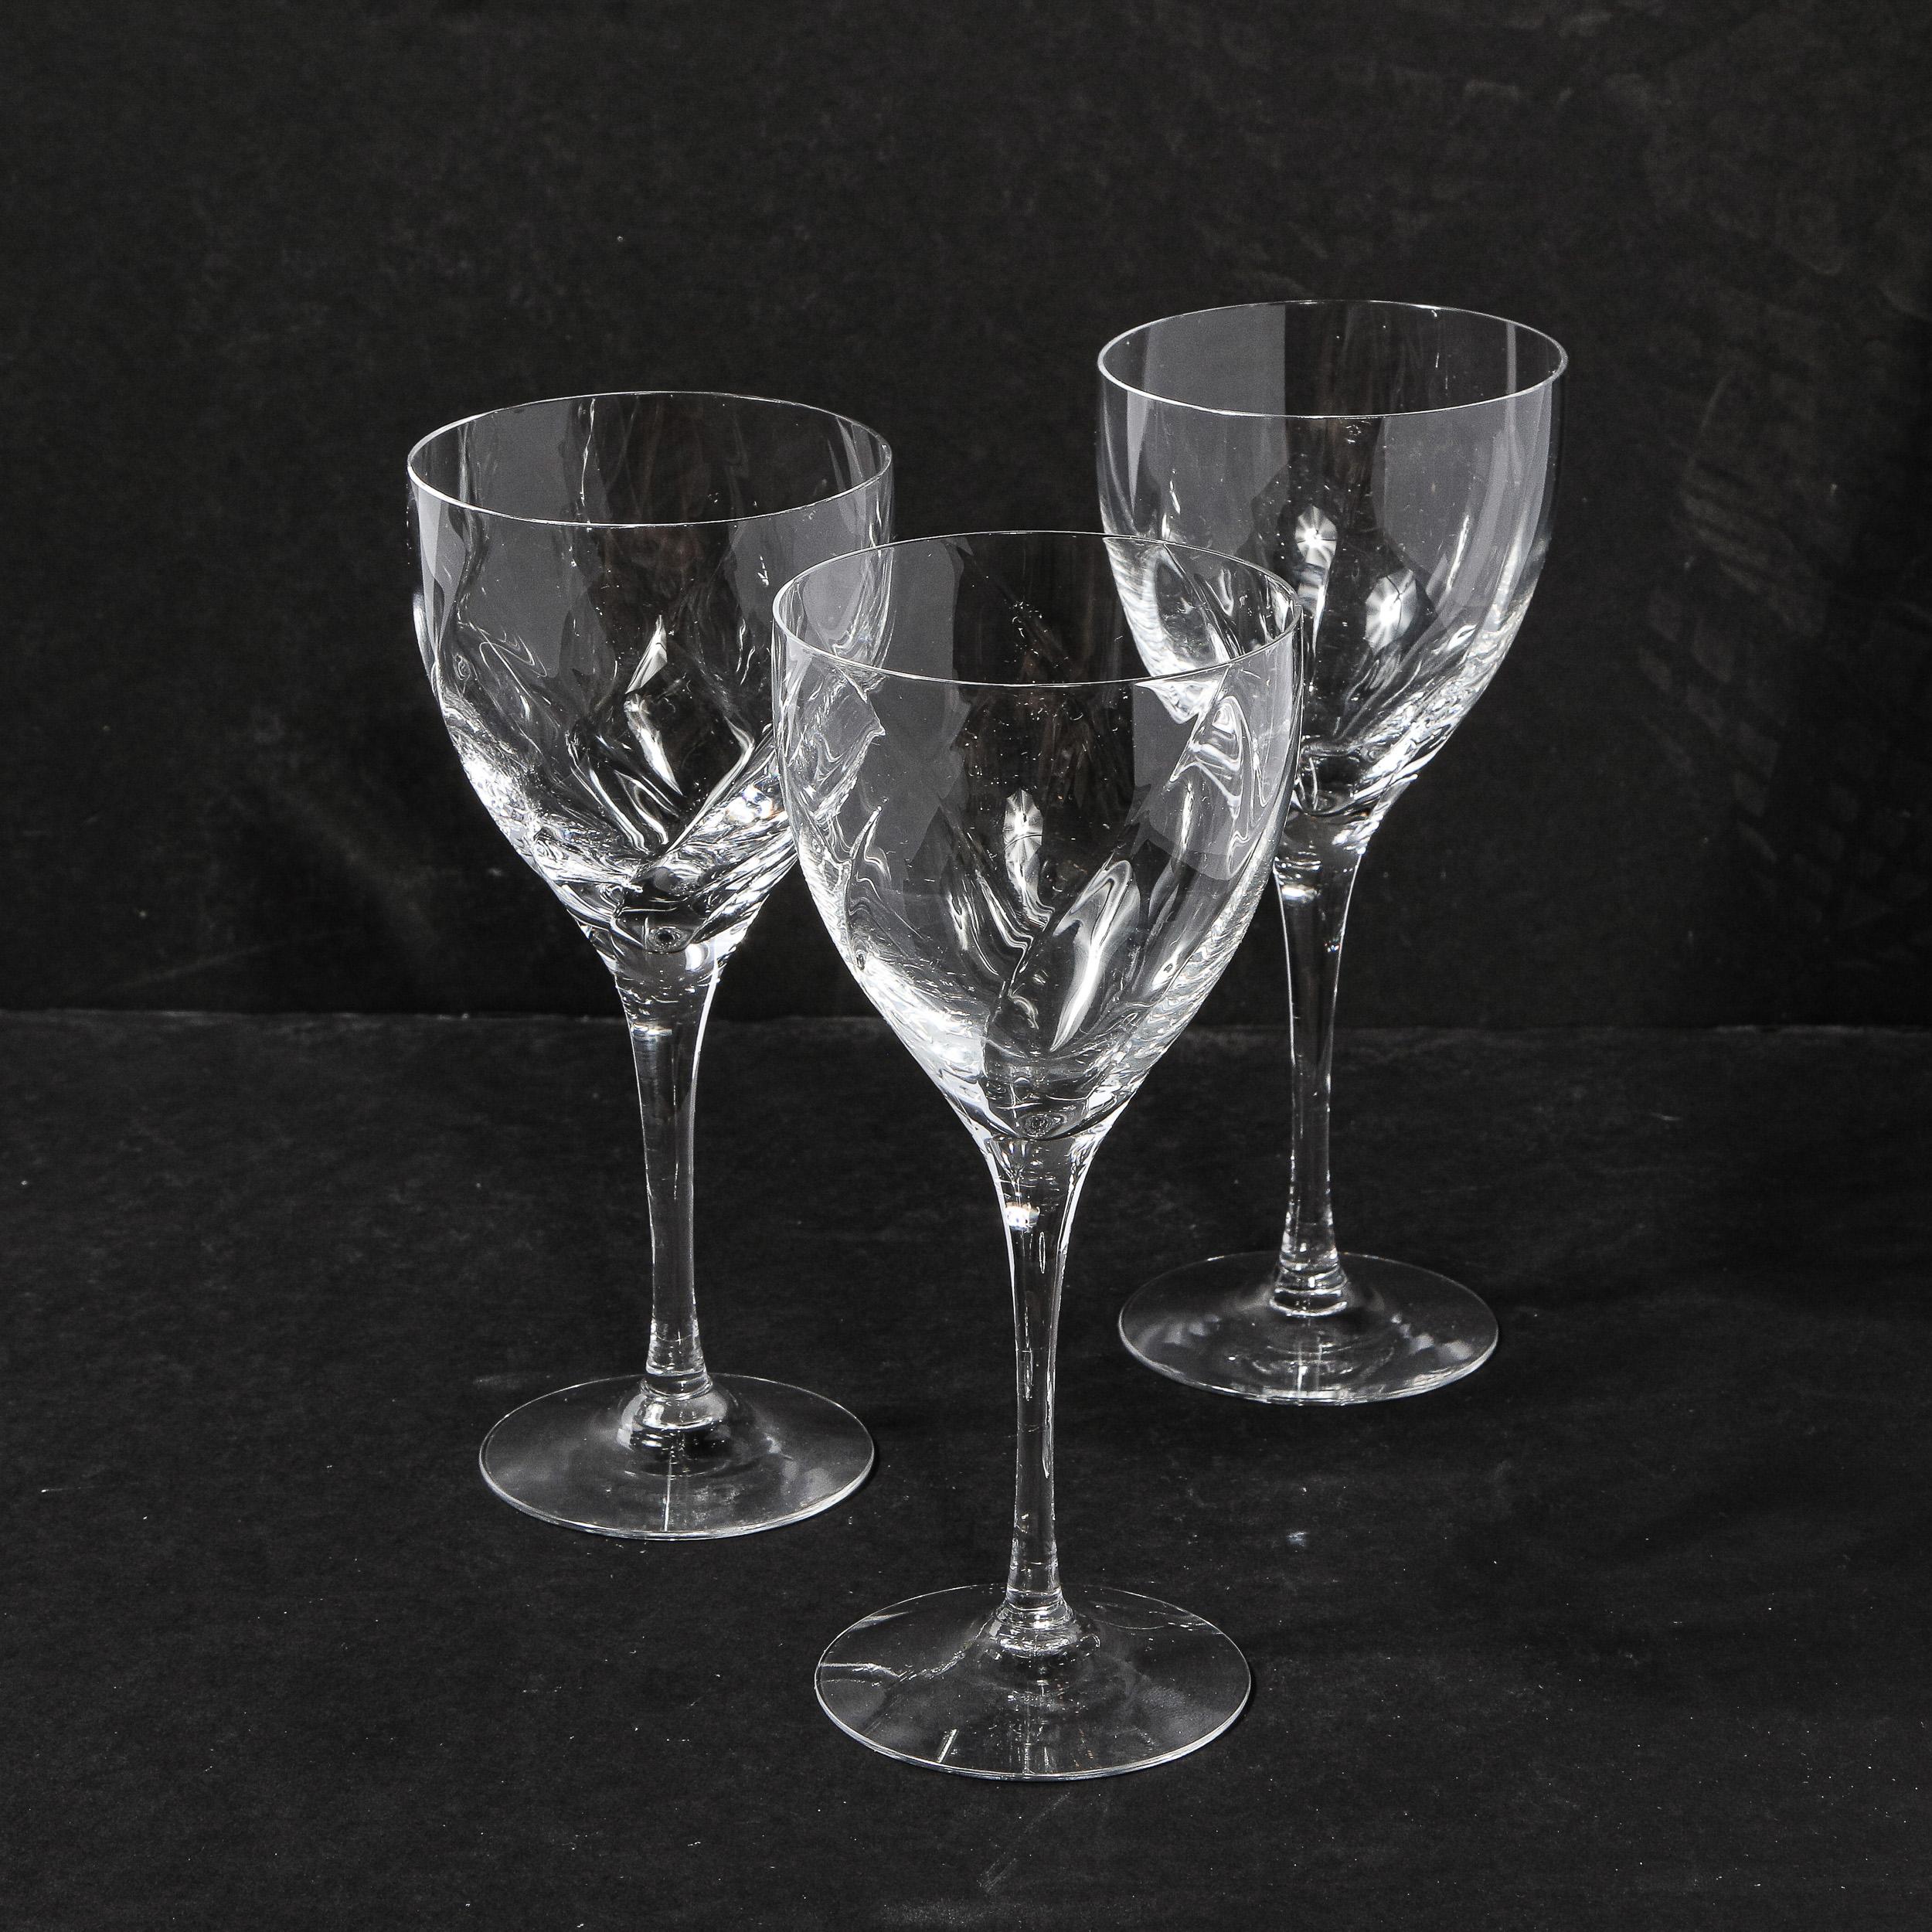 Set of Twelve Textured Translucent Crystal Wine Glasses by Tiffany & Co. 4